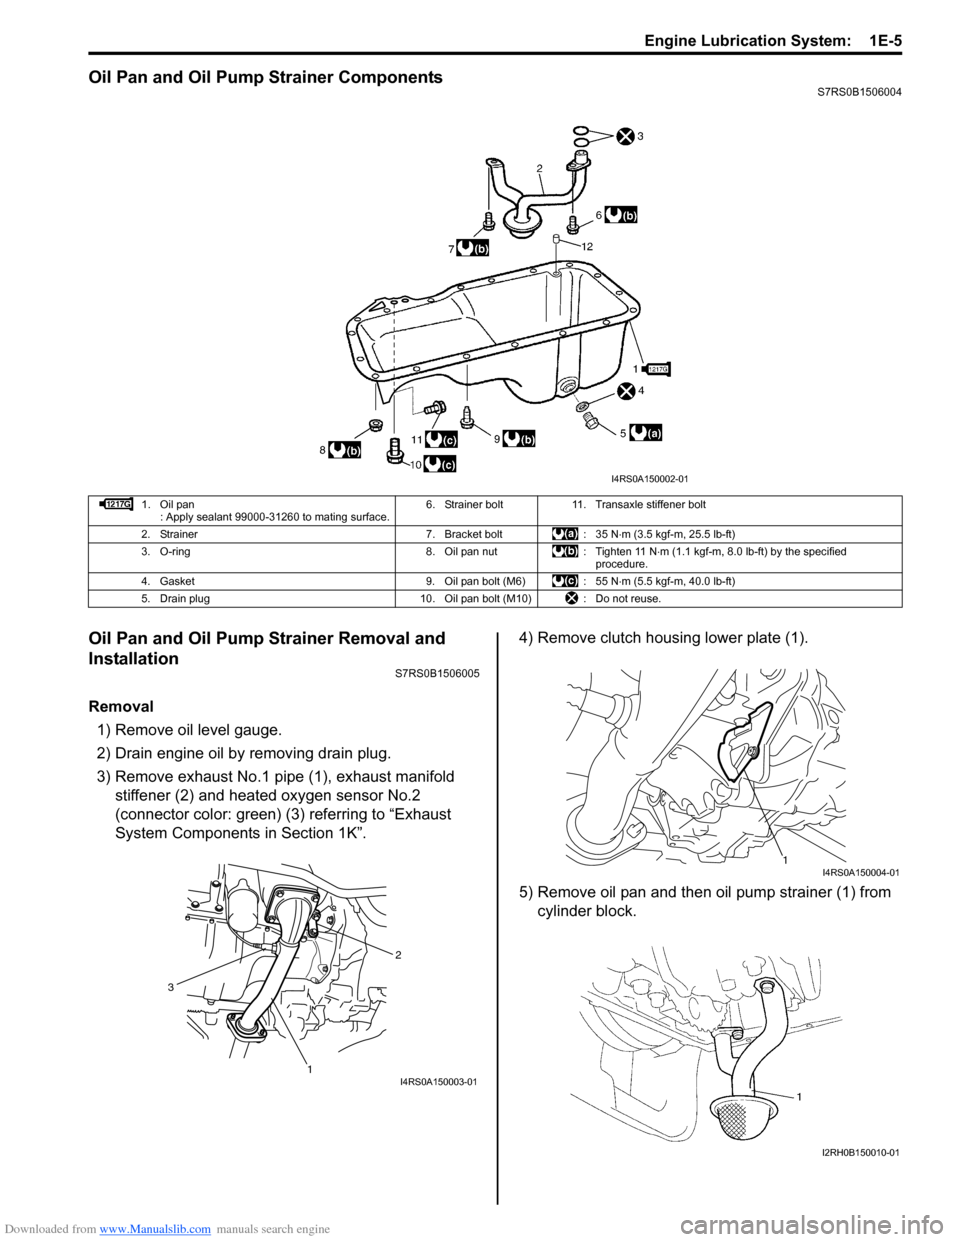 SUZUKI SWIFT 2008 2.G Service Workshop Manual Downloaded from www.Manualslib.com manuals search engine Engine Lubrication System:  1E-5
Oil Pan and Oil Pump Strainer ComponentsS7RS0B1506004
Oil Pan and Oil Pump Strainer Removal and 
Installation
